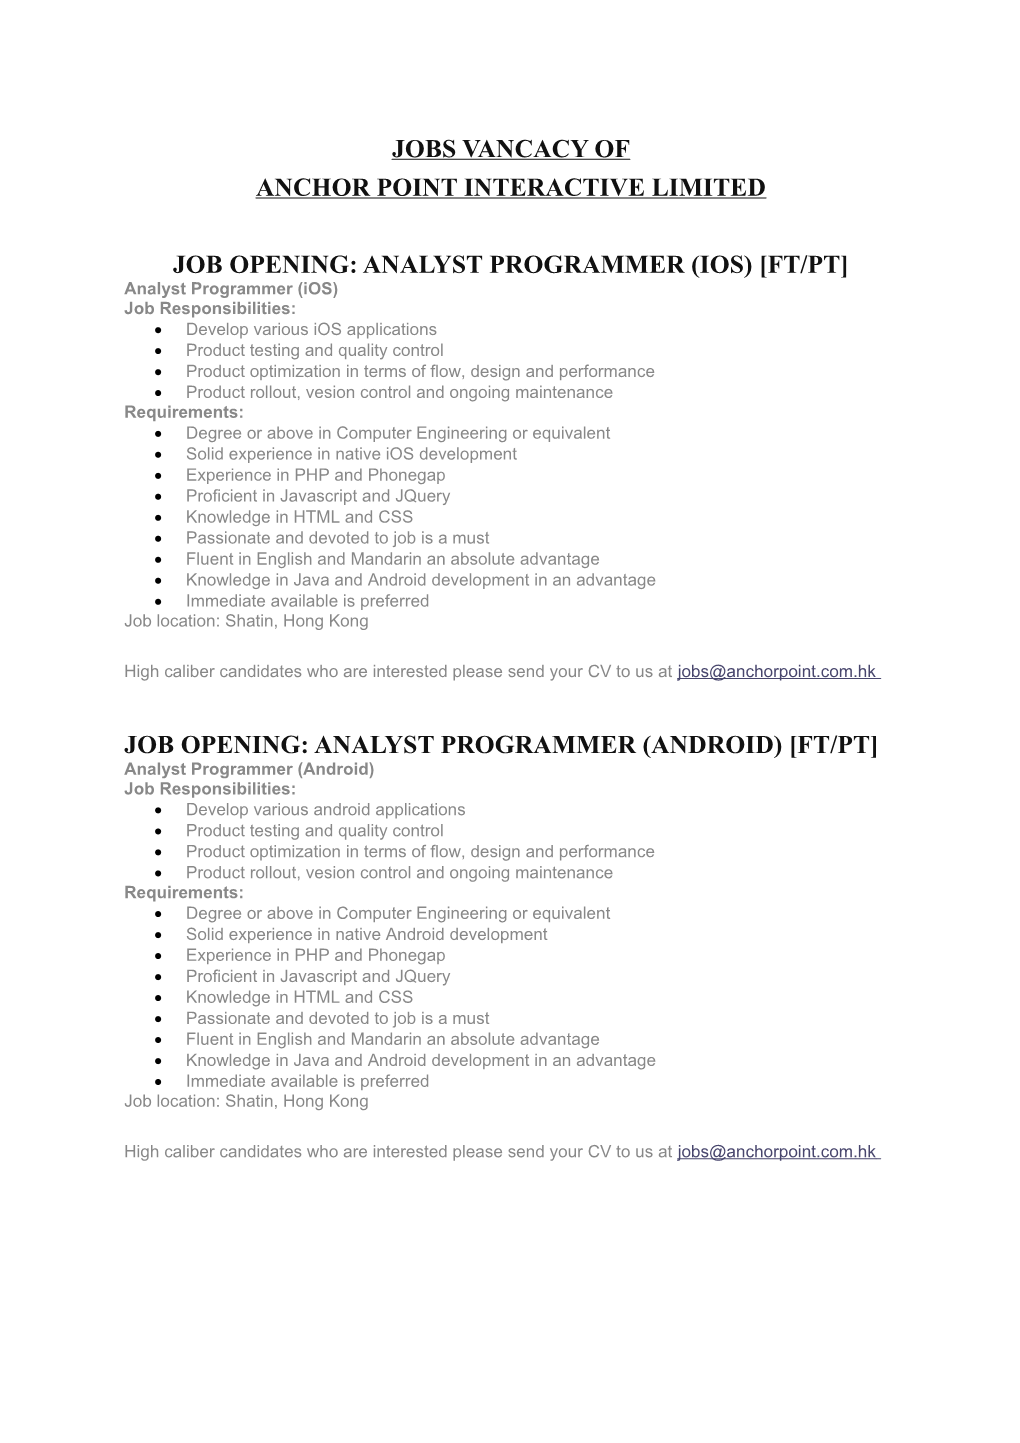 Anchor Point Interactive Limited JOB OPENING: ANALYST PROGRAMMER (IOS) FT/PT